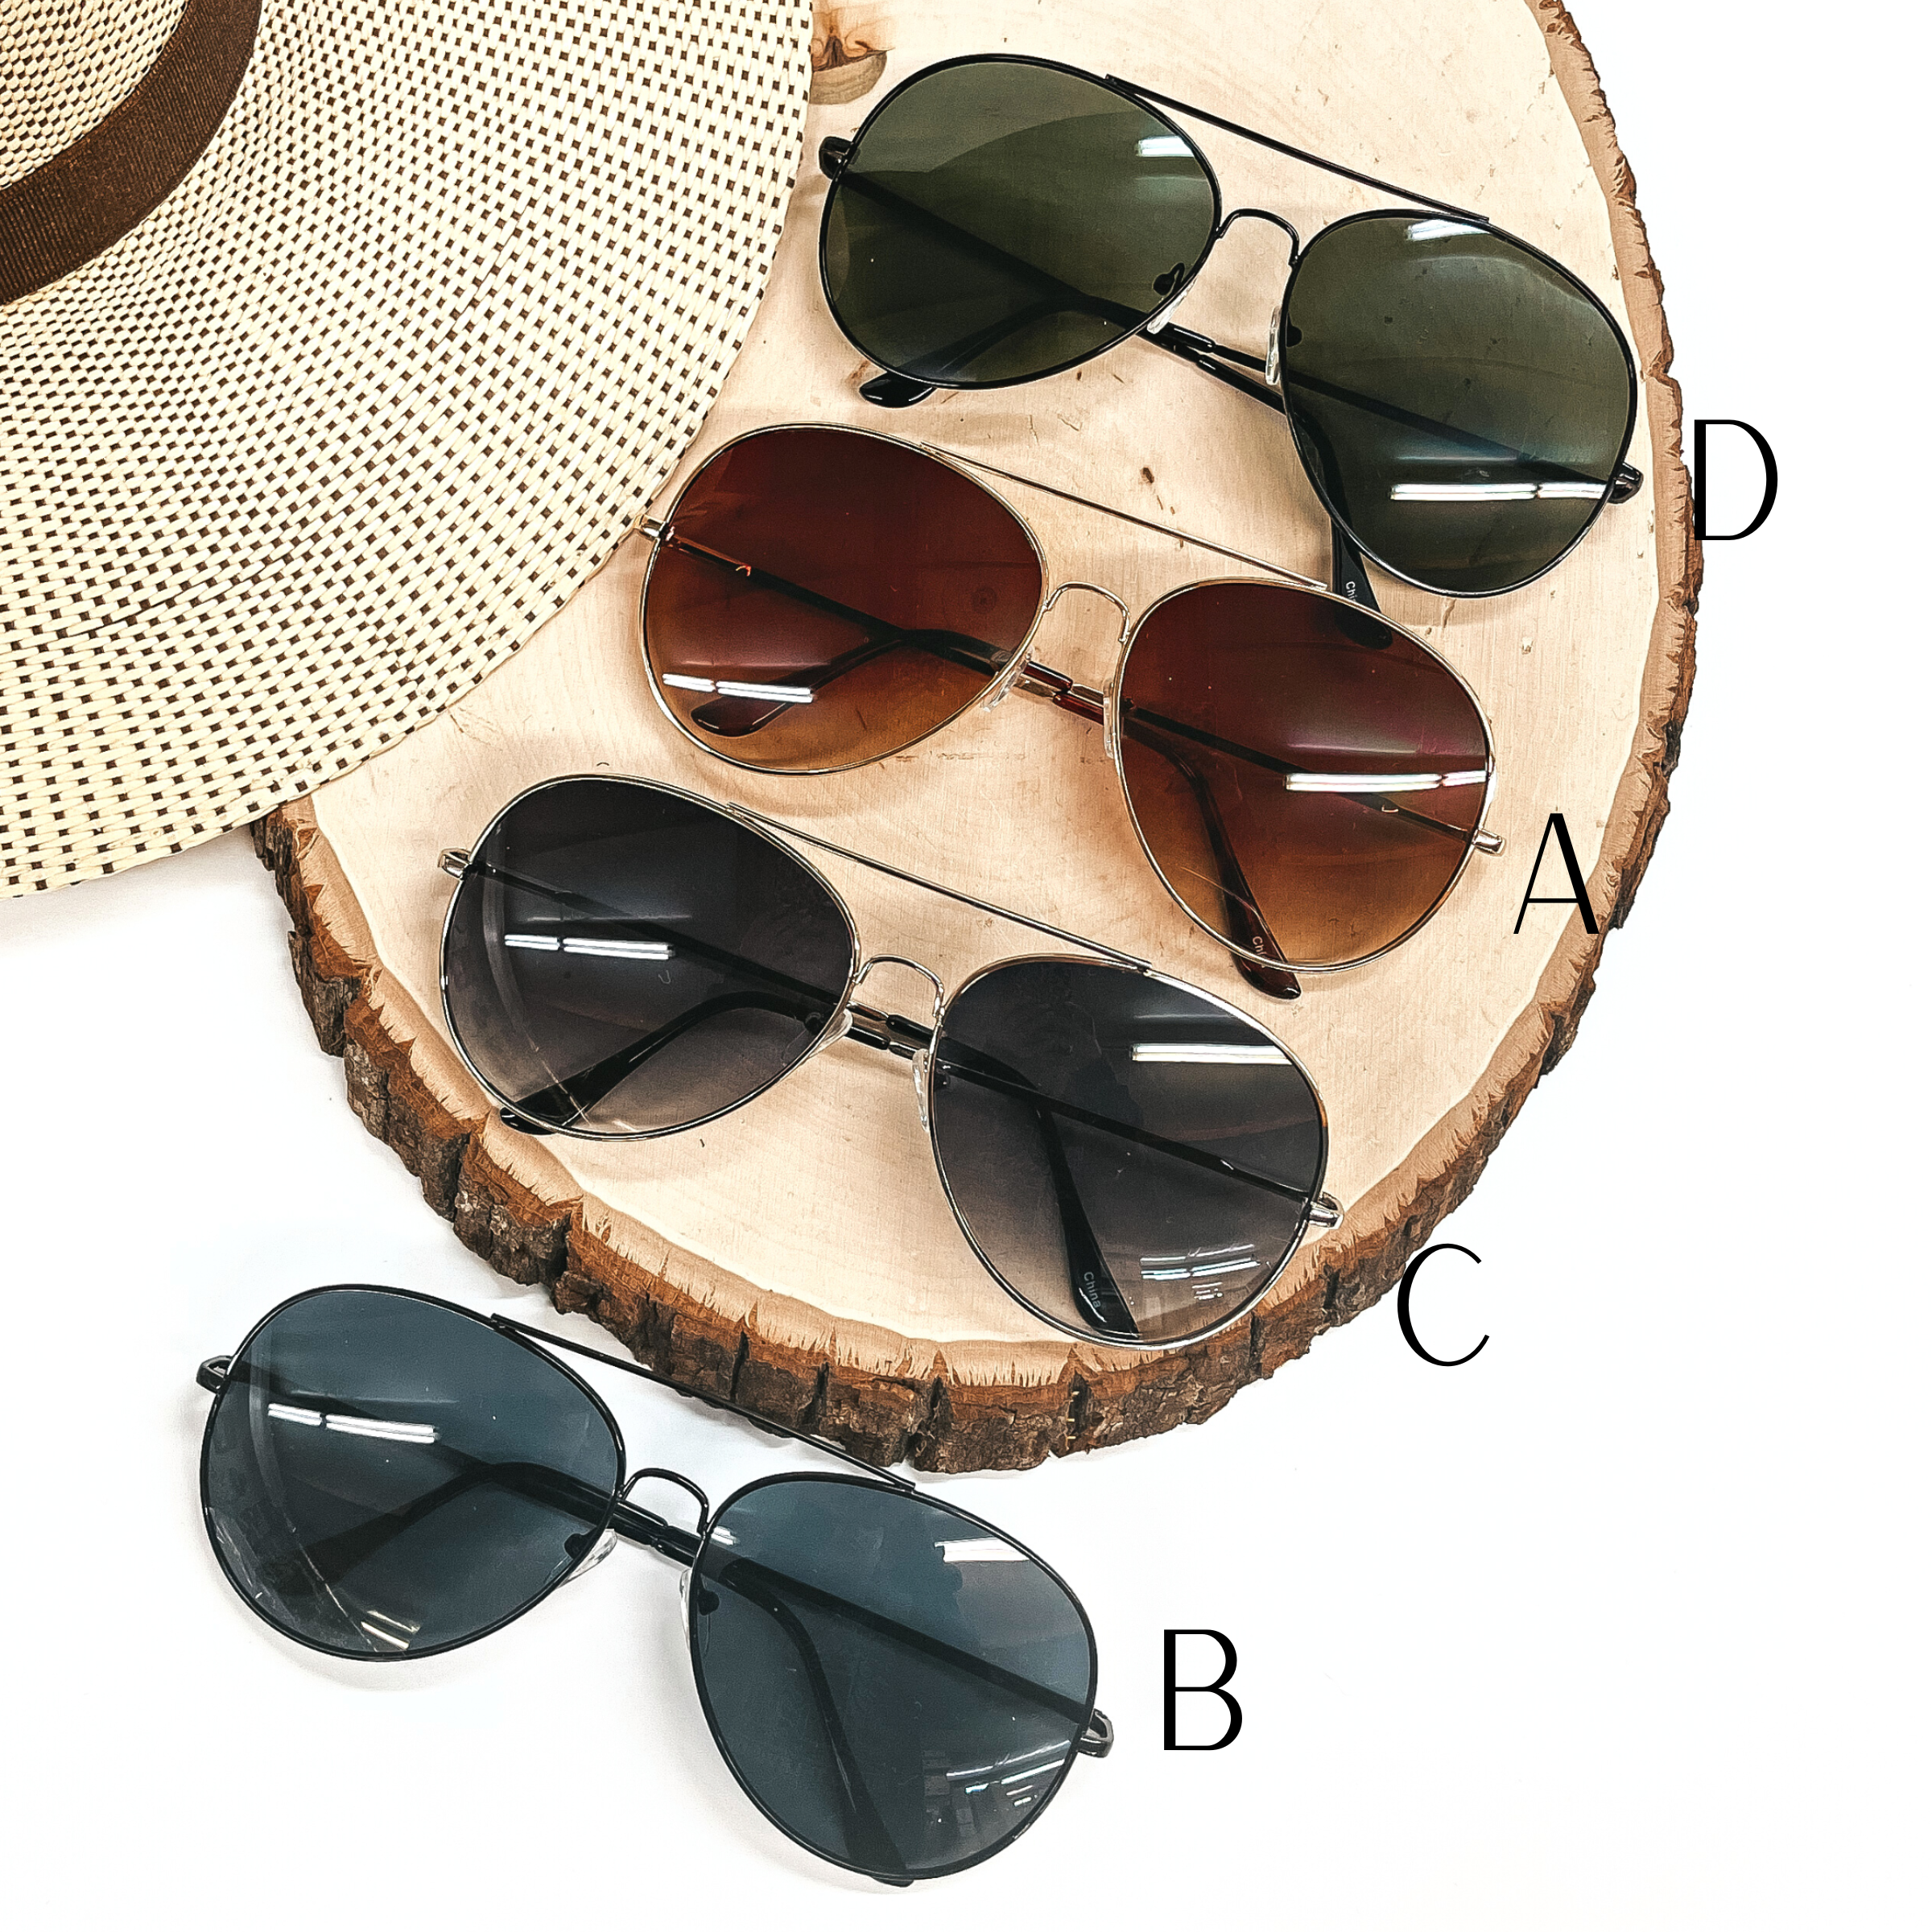 There are four pairs of aviator sunglasses in different  color frames and lenses. From top to bottom; dark green lenses with a black  frame/outline, brown lenses with a gold frame/outline, dark grey lenses  with a silver frame/outline, and black lense with a black frame/outline.  These sunglasses are taken on a slab of wood with a straw hat in the side  as decor.